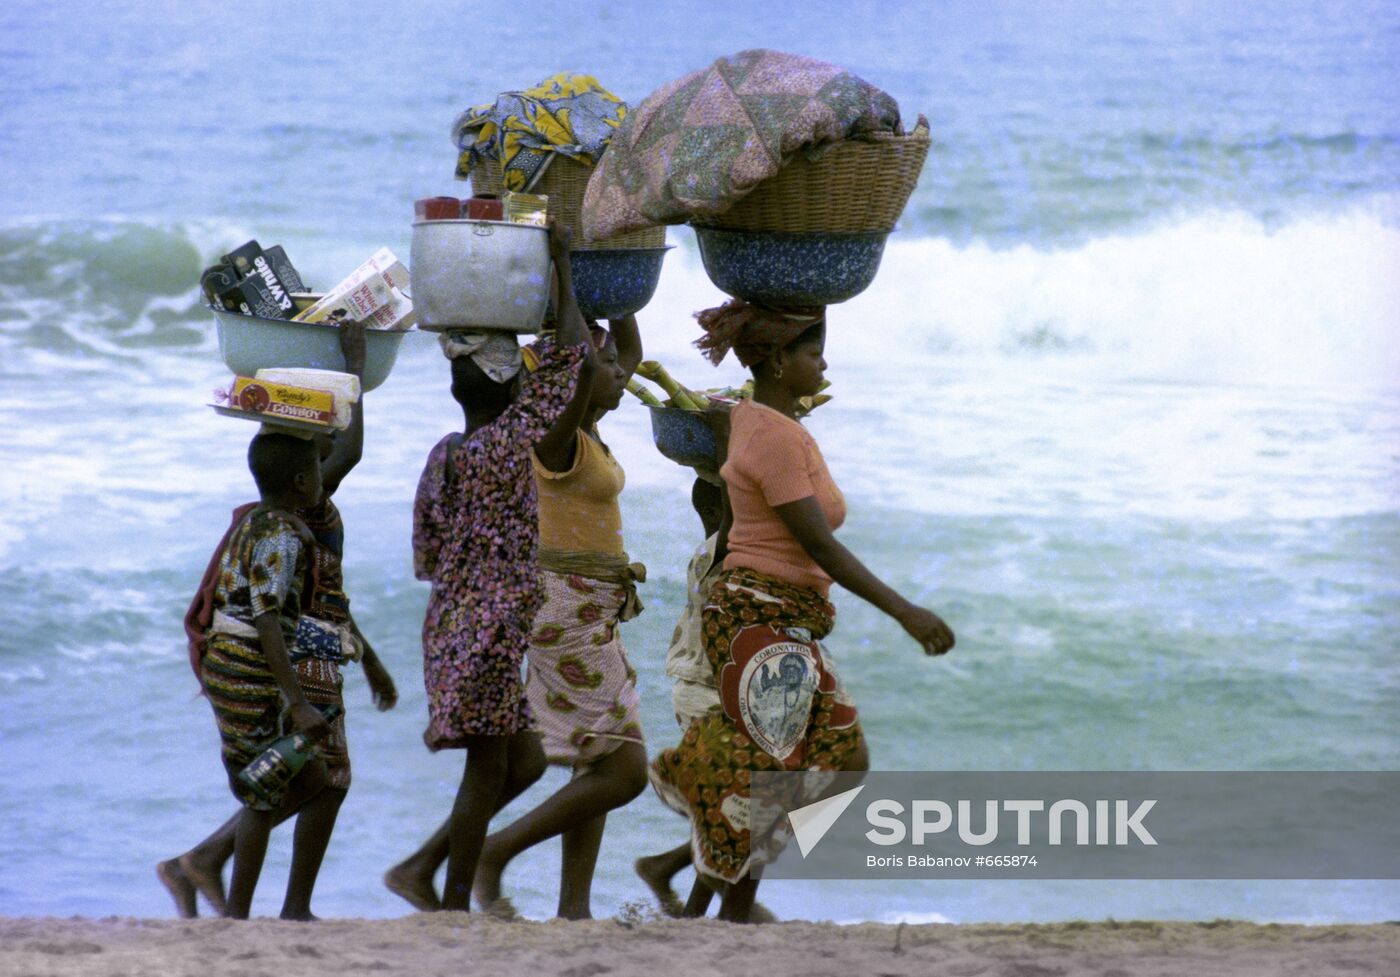 Nigerians on the shore